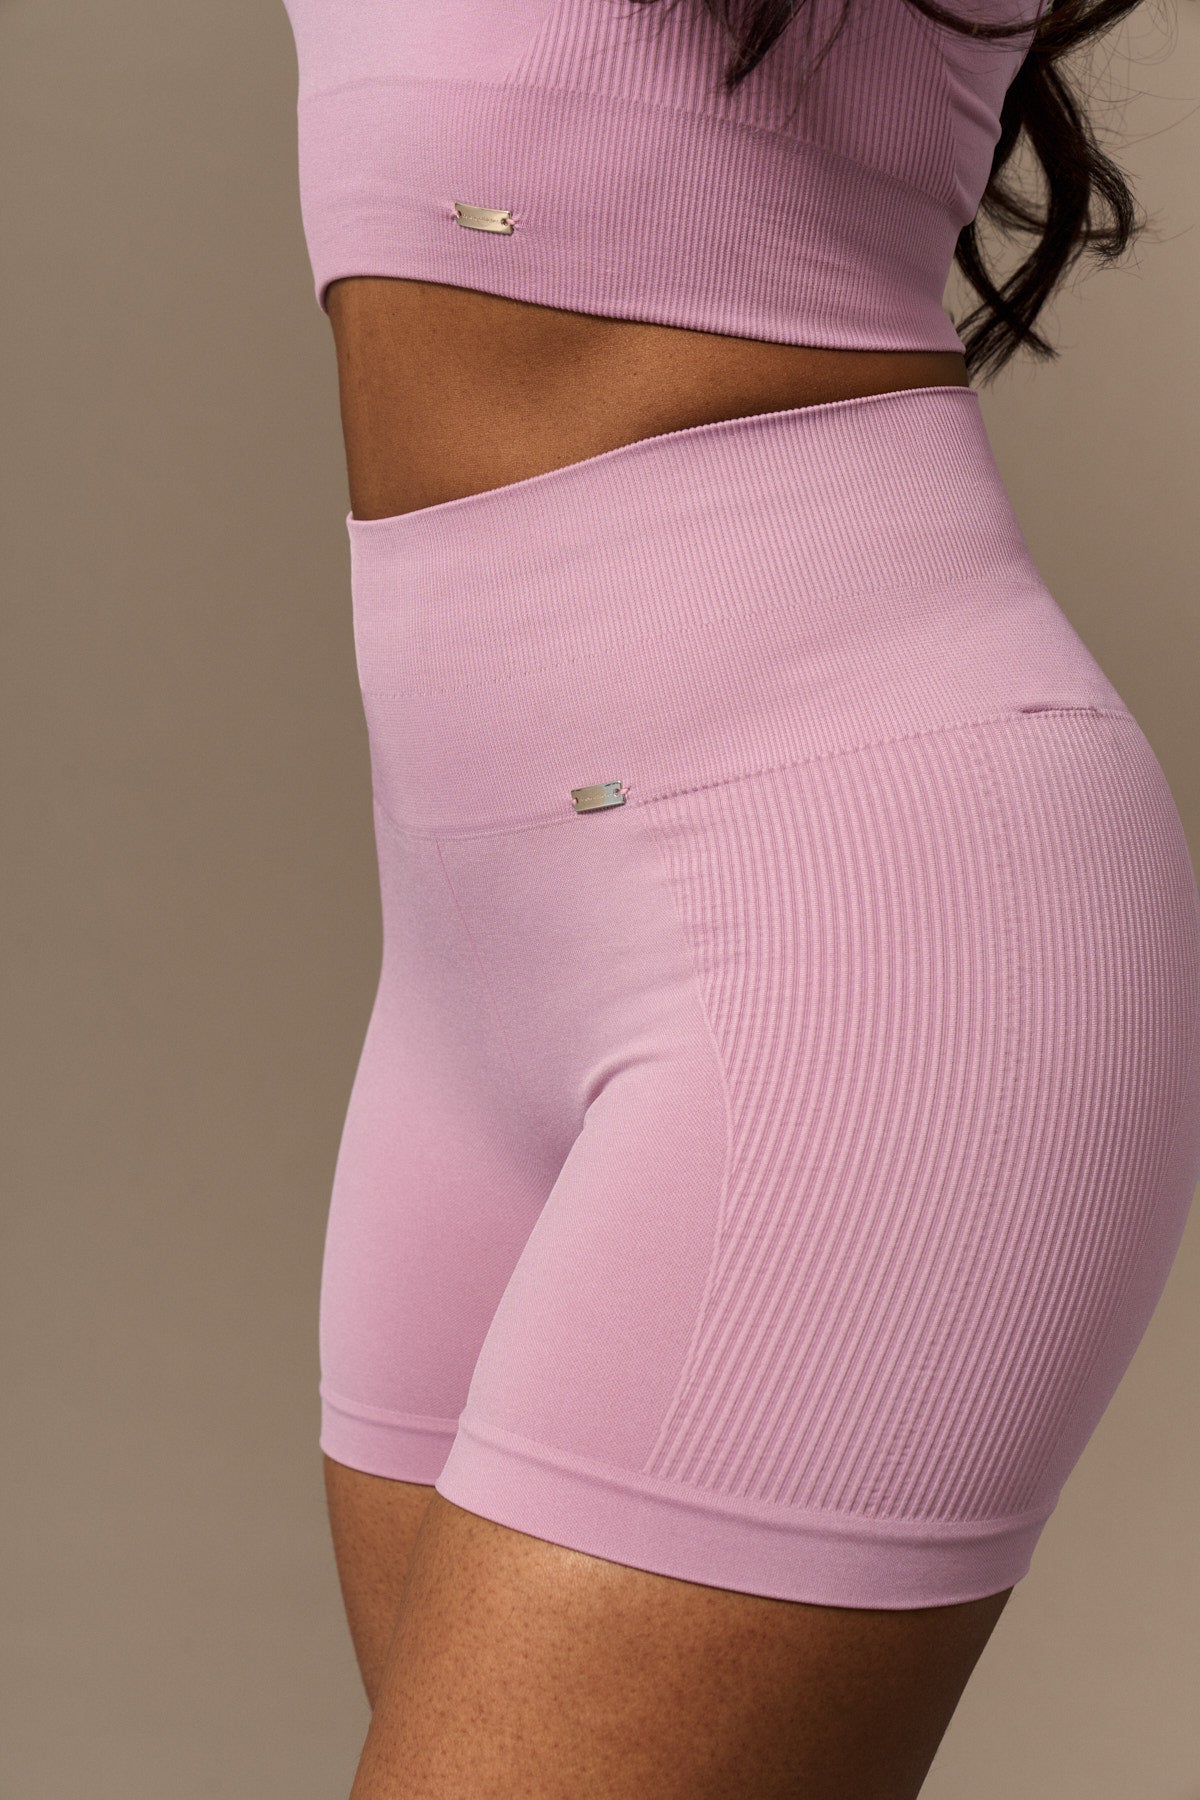 Bliss Short Push-Up en Pink-Shorts-Tienda Ropa Leggings Yoga Sostenibles Reciclados Mujer On-line Barcelona Believe Athletics Sustainable Recycled Yoga Clothes